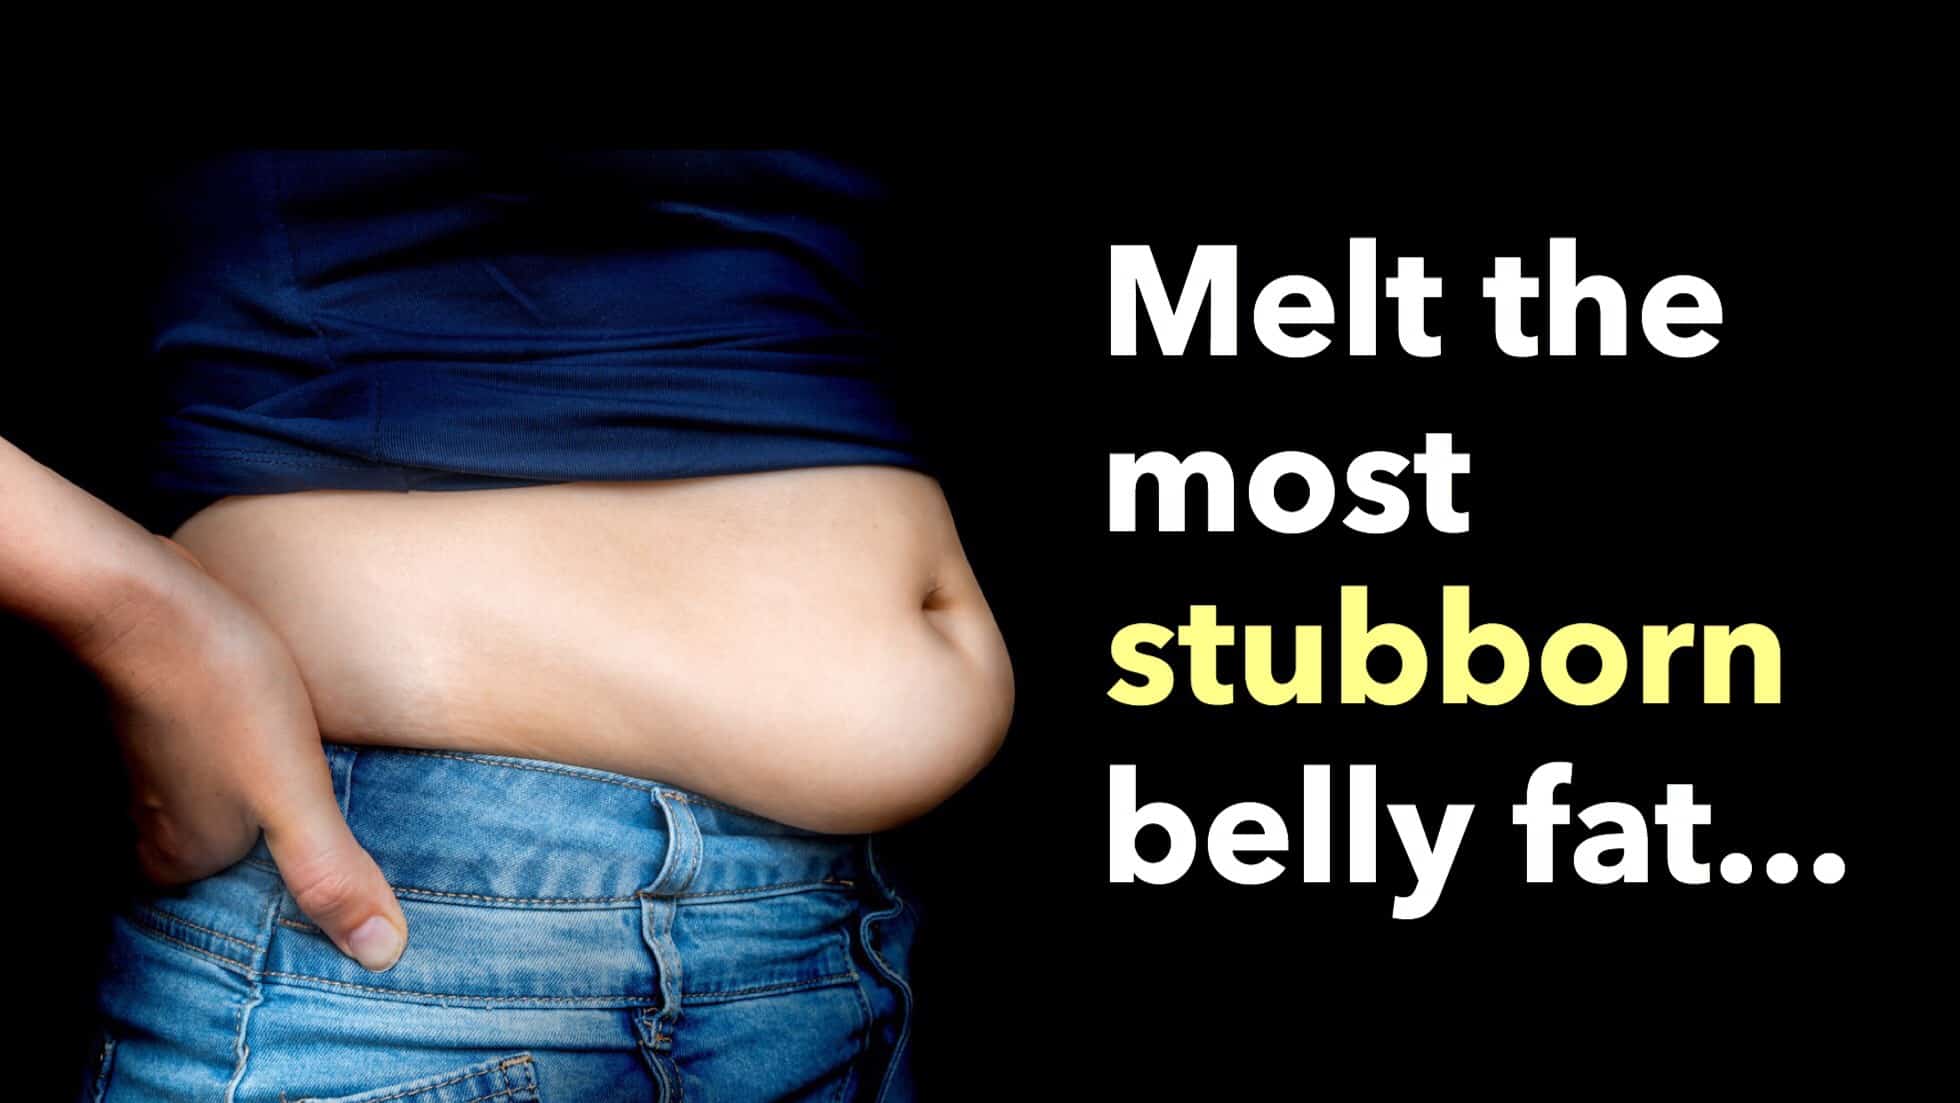 10 Ways To Melt The Most Stubborn Belly Fat